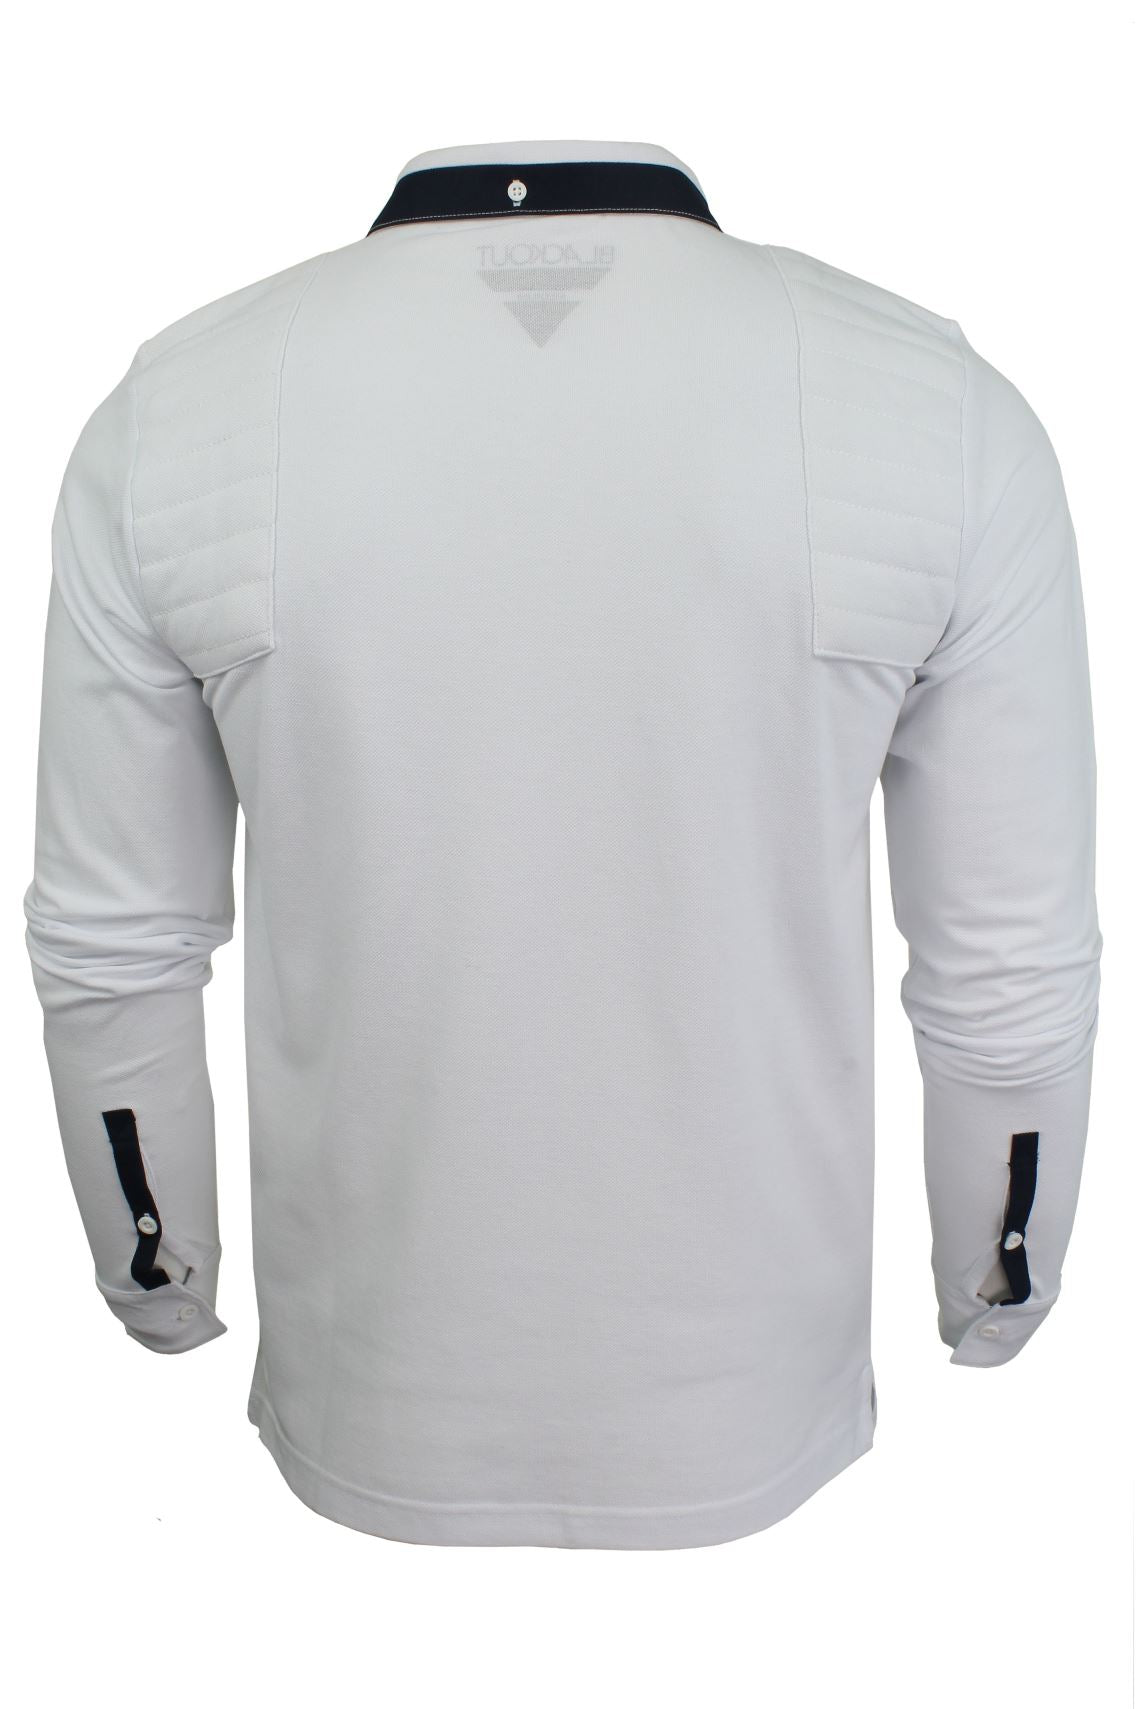 Mens Short Sleeved Polo Shirt from the Blackout Collection by Voi Jeans, 03, Dubb, Cole - White